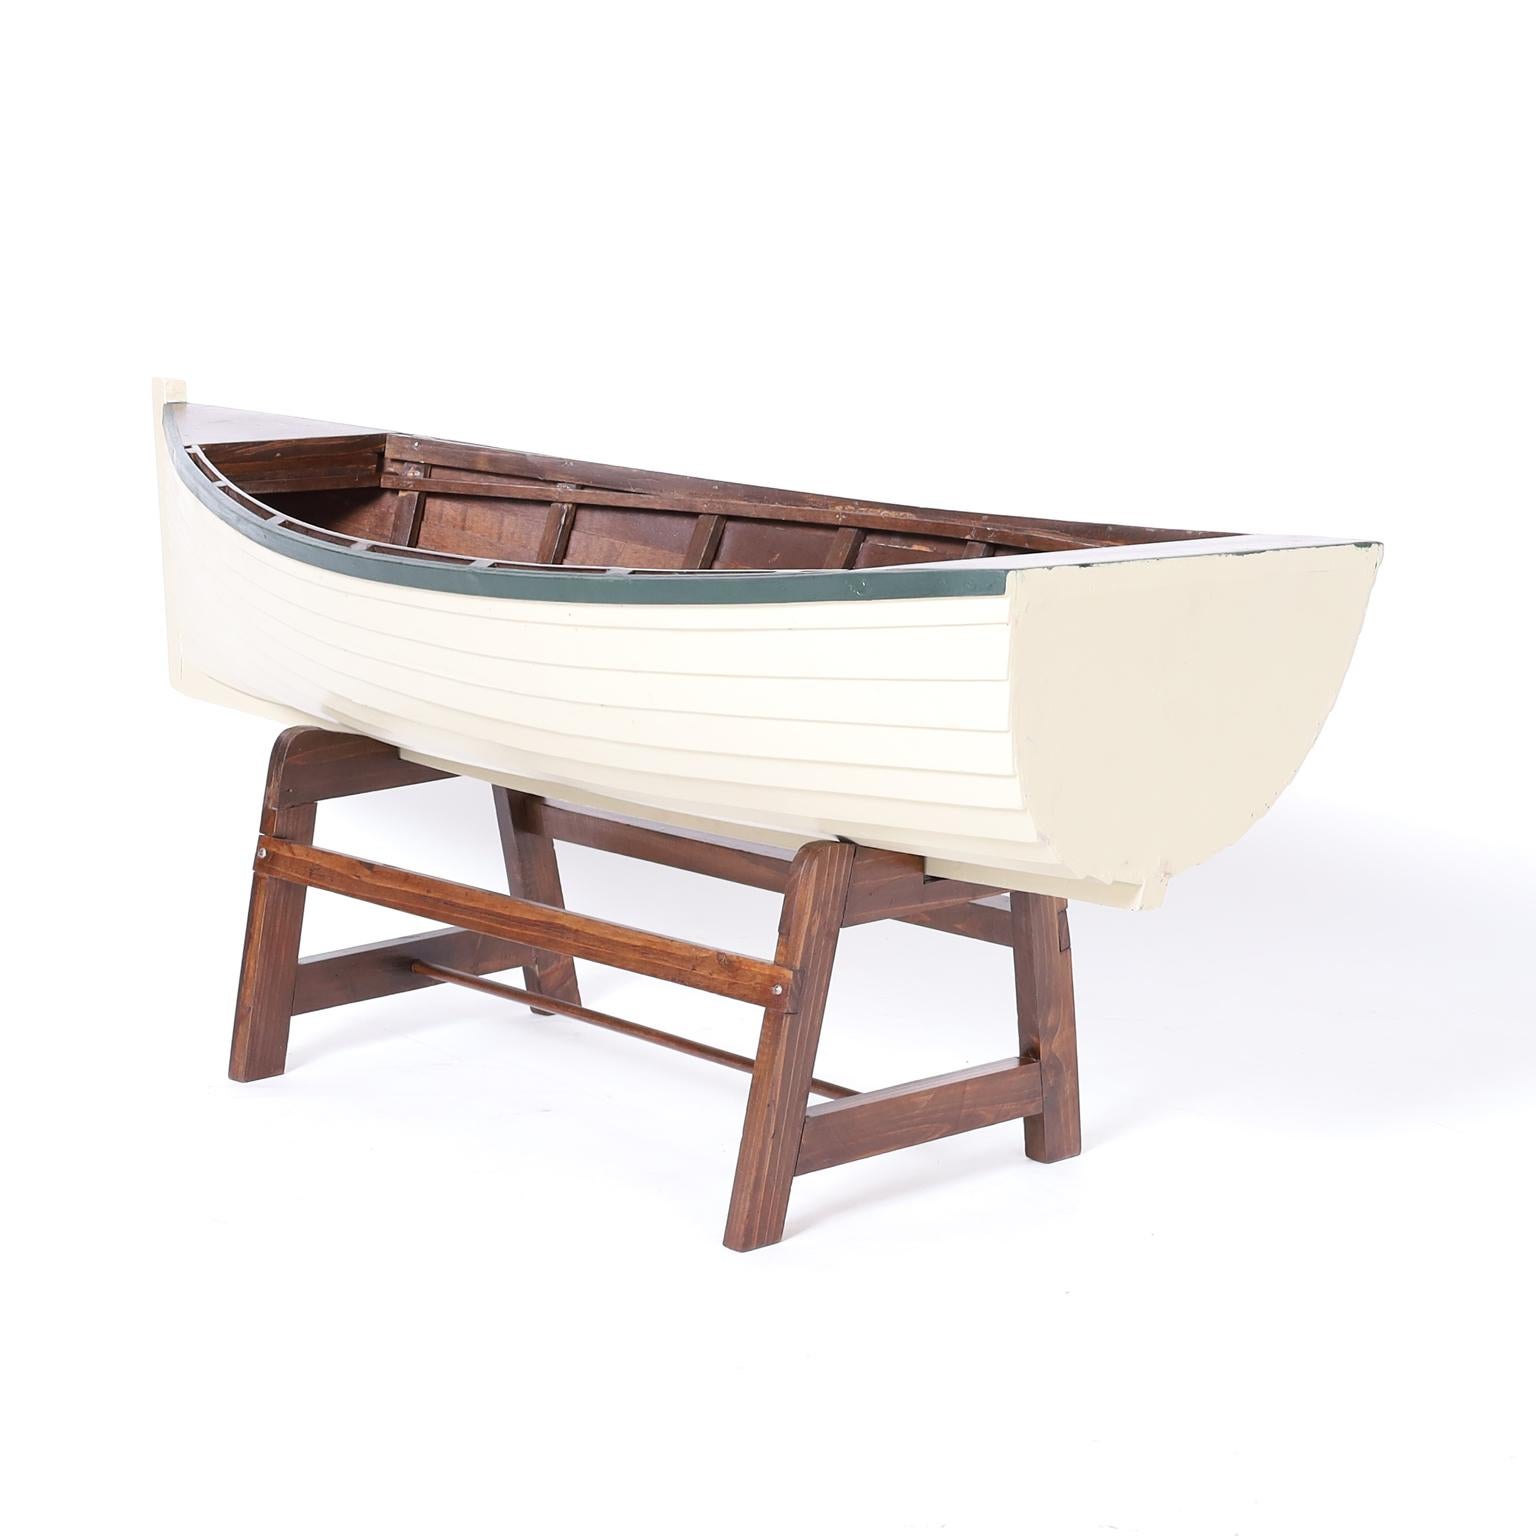 Adirondack Large Row Boat or Dinghy Model For Sale